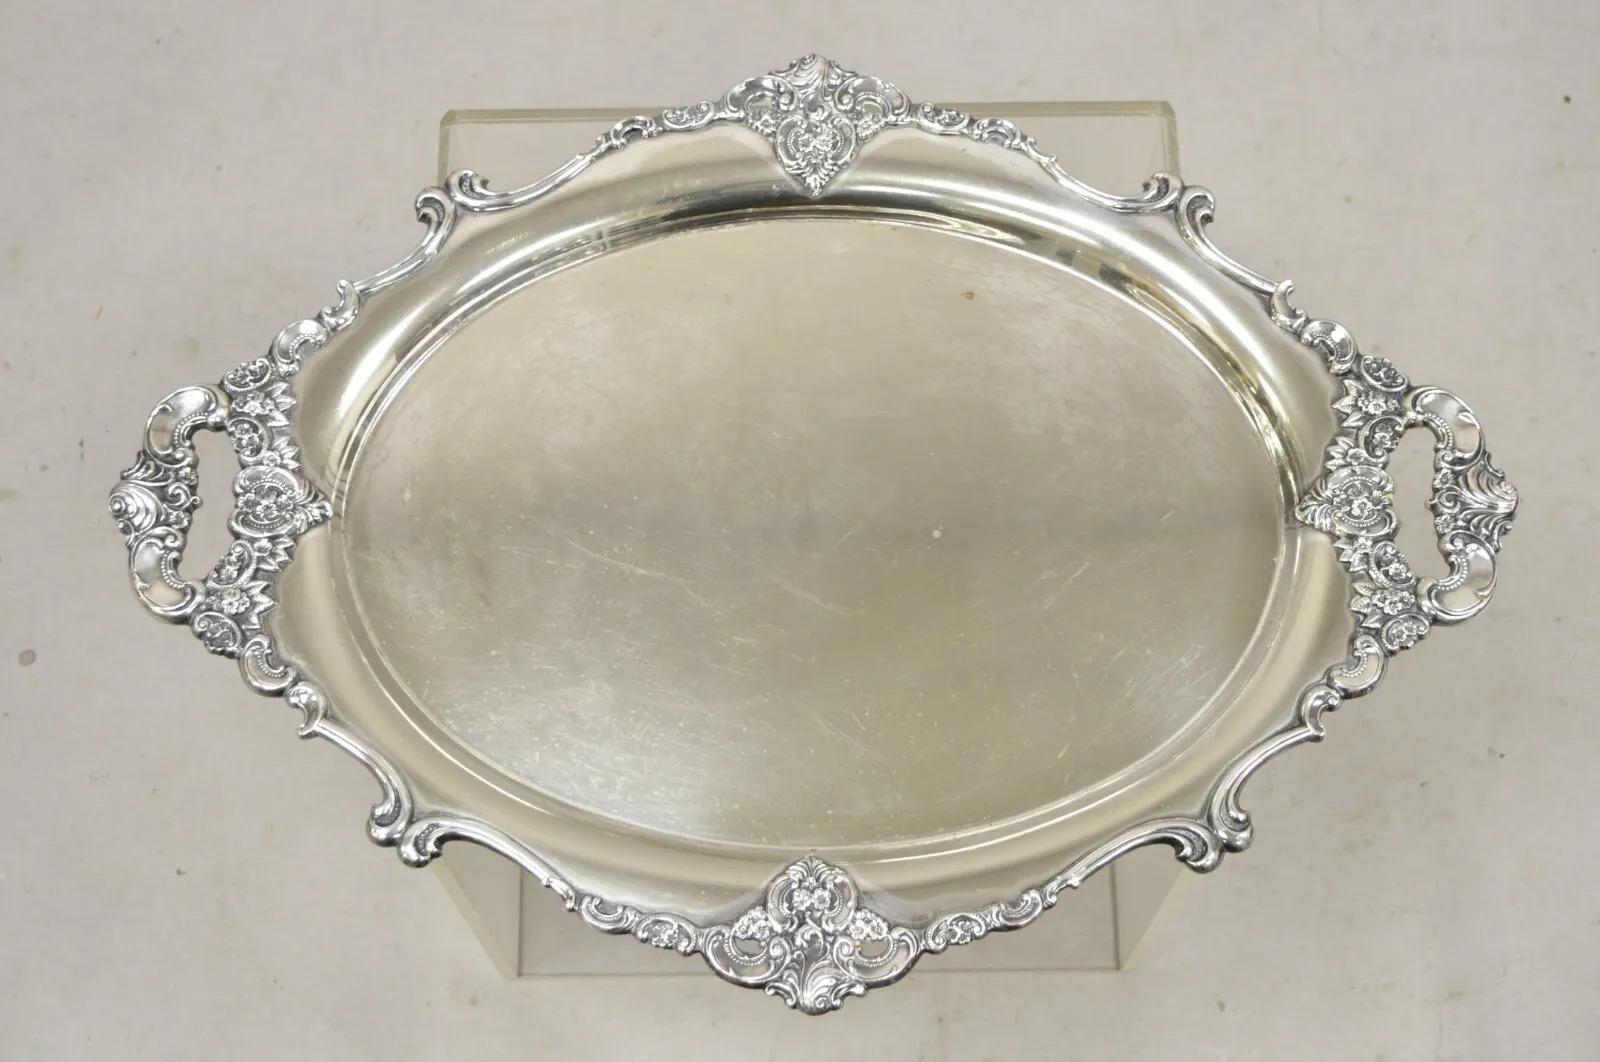 Vintage Miyata (Japan) English Victorian Style Silver Plated Oval Floral Repousse Platter Tray. Circa Late 20th Century.
Measurements: 1